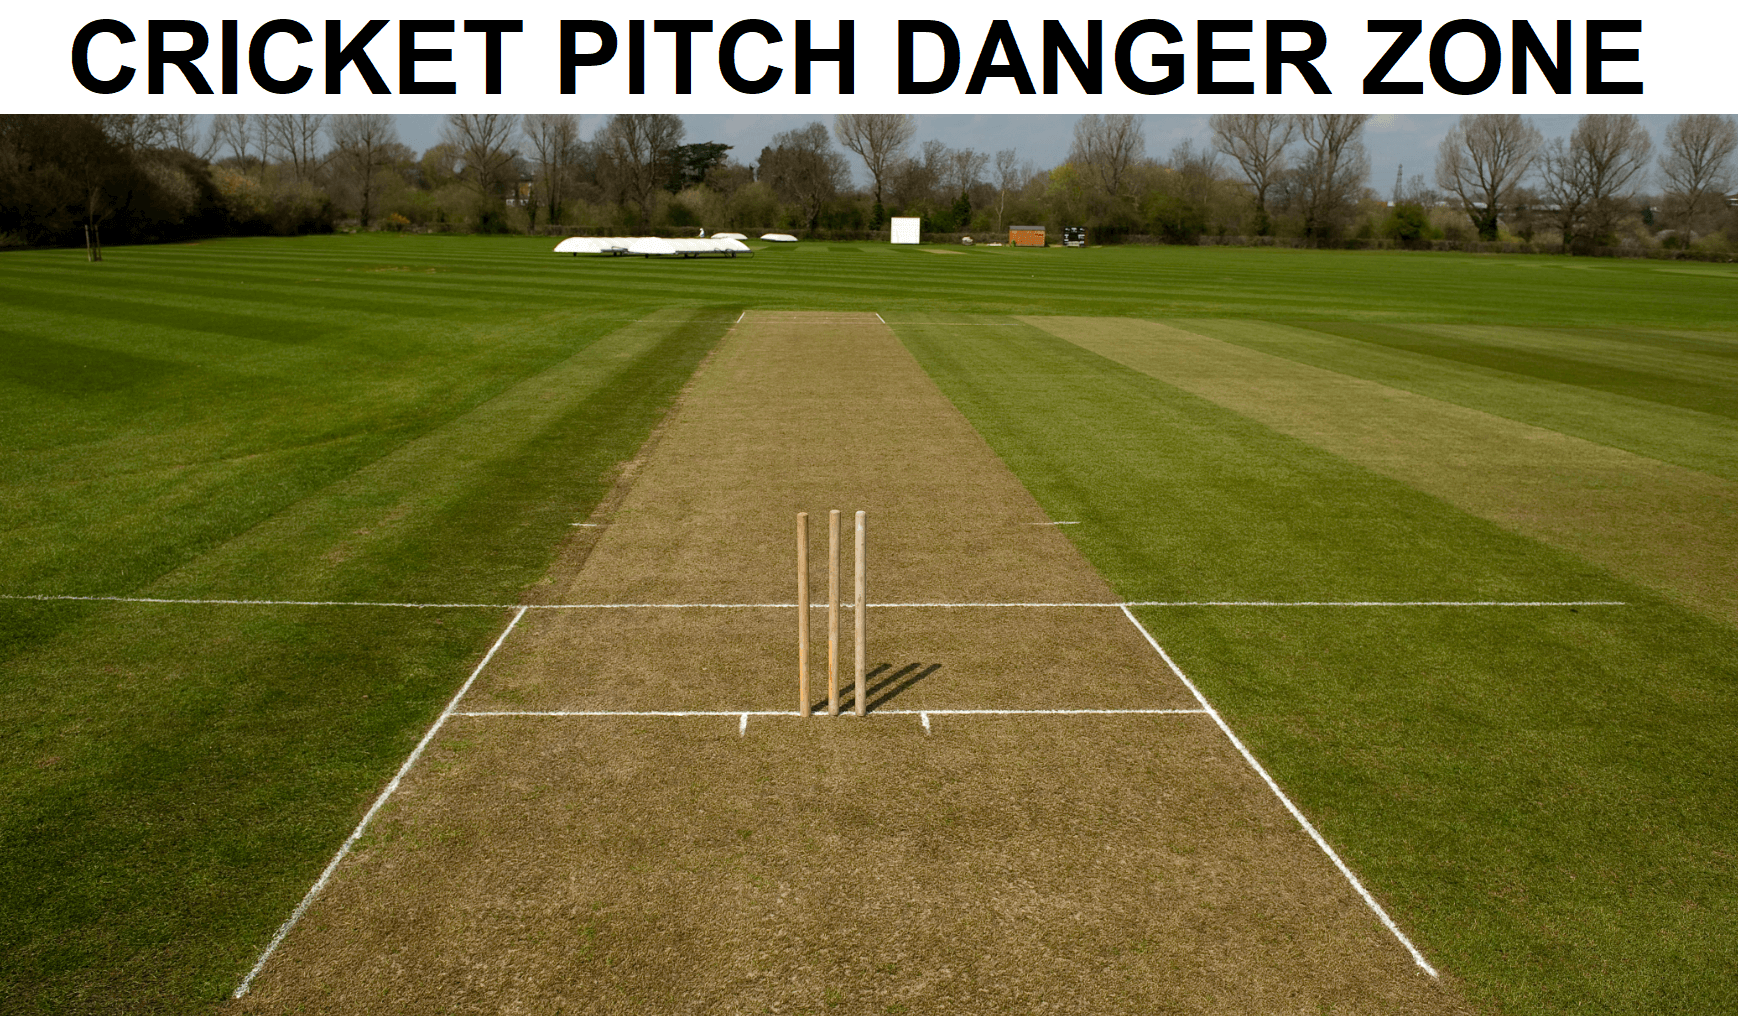 What is the danger zone of a cricket pitch?